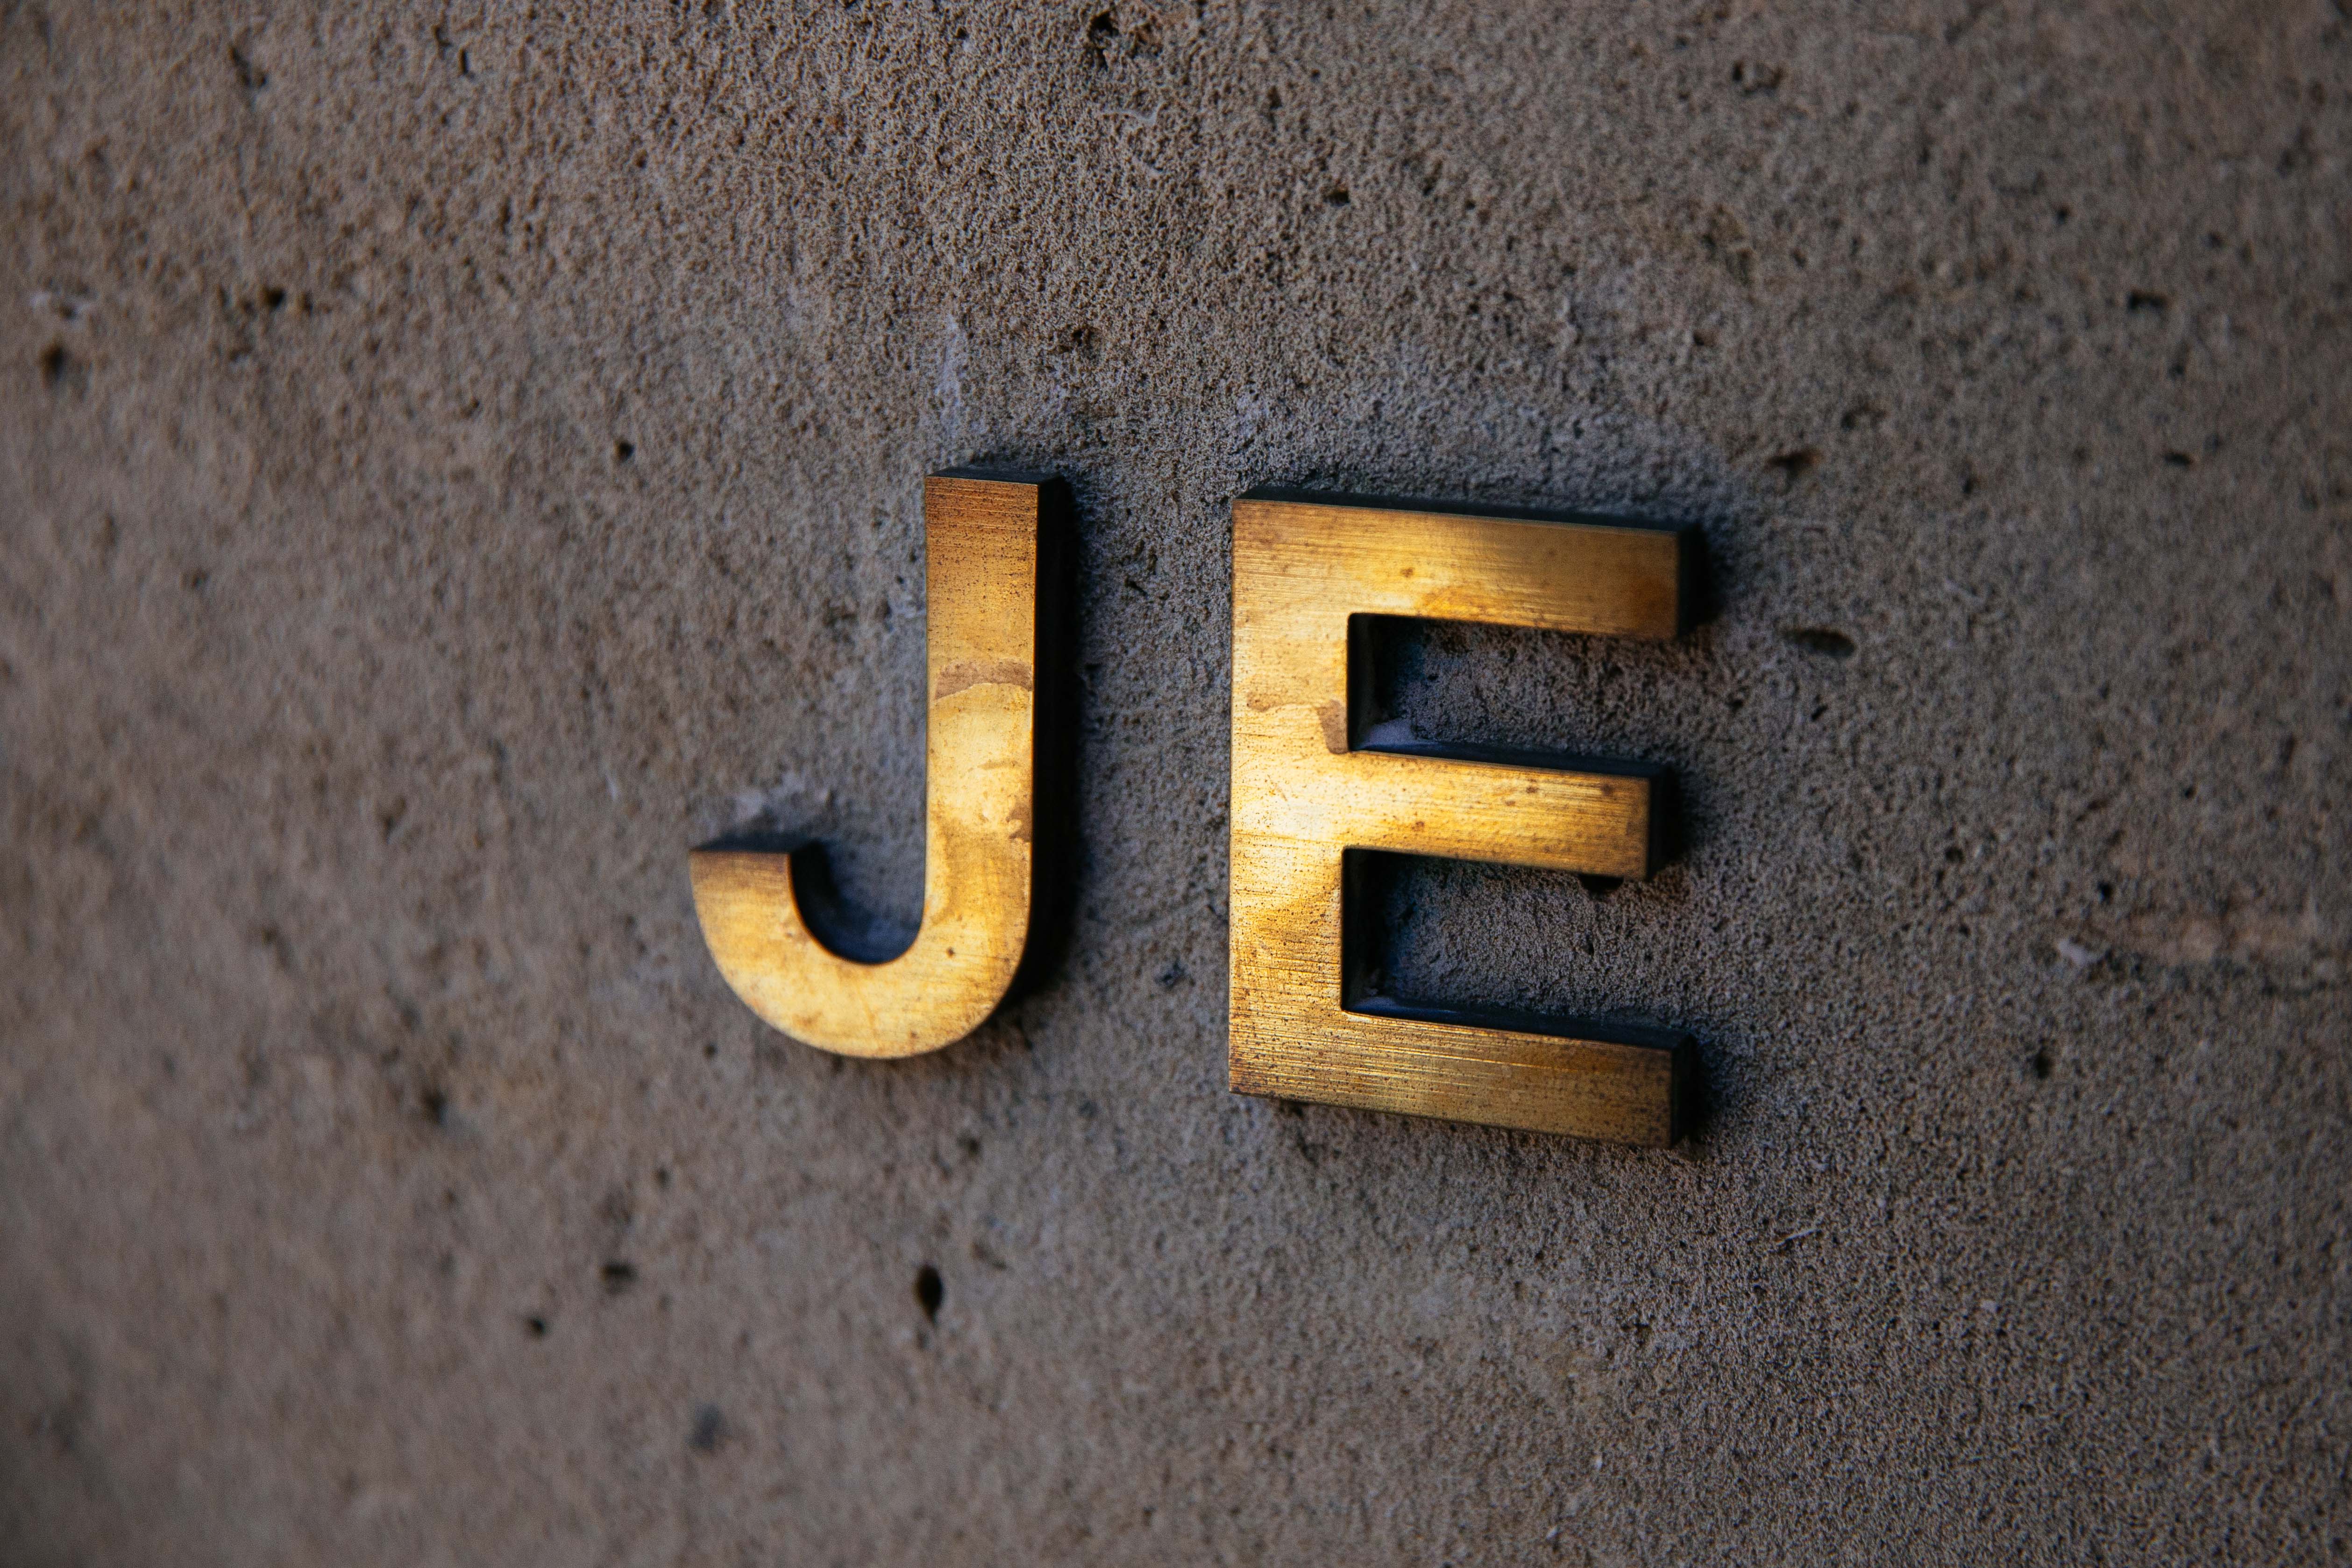 NEW YORK, NY - JULY 15: A monogram on the exterior of the residence owned by Jeffrey Epstein on the Upper East Side is seen on July 15, 2019 in New York City. (Photo by Kevin Hagen/Getty Images)